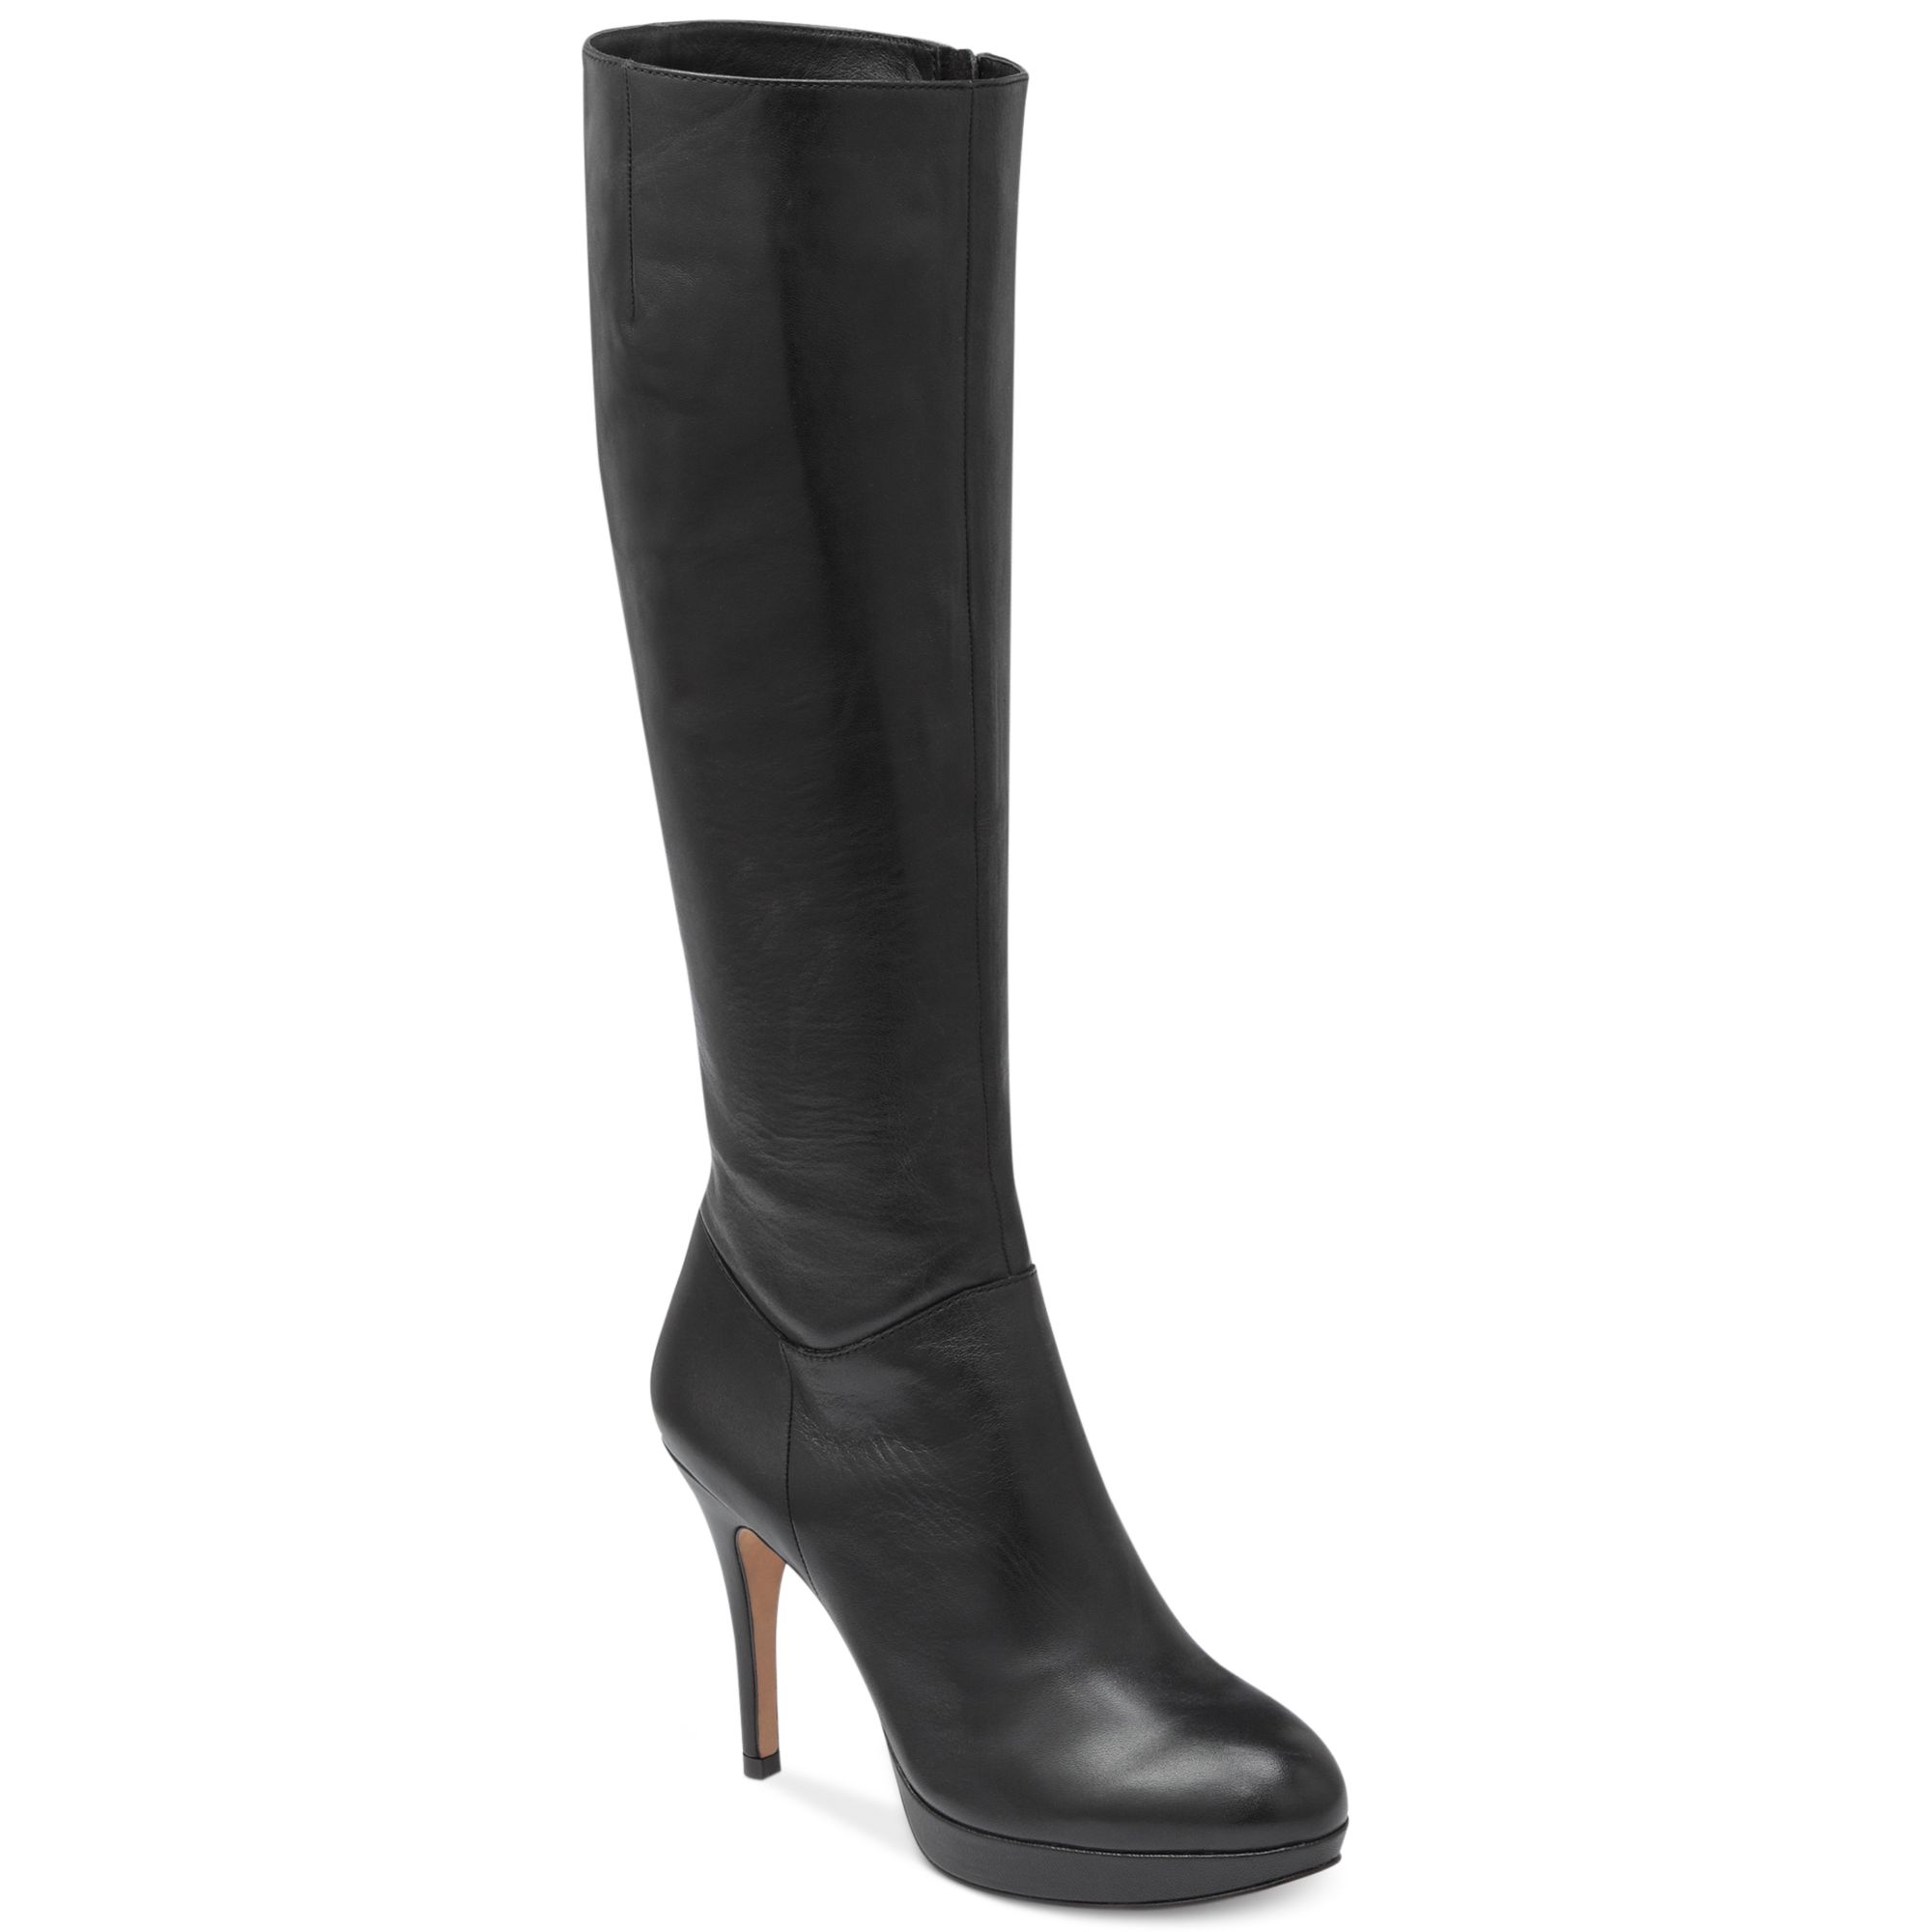 Lyst - Vince Camuto Emip Tall Shaft Dress Boots in Black